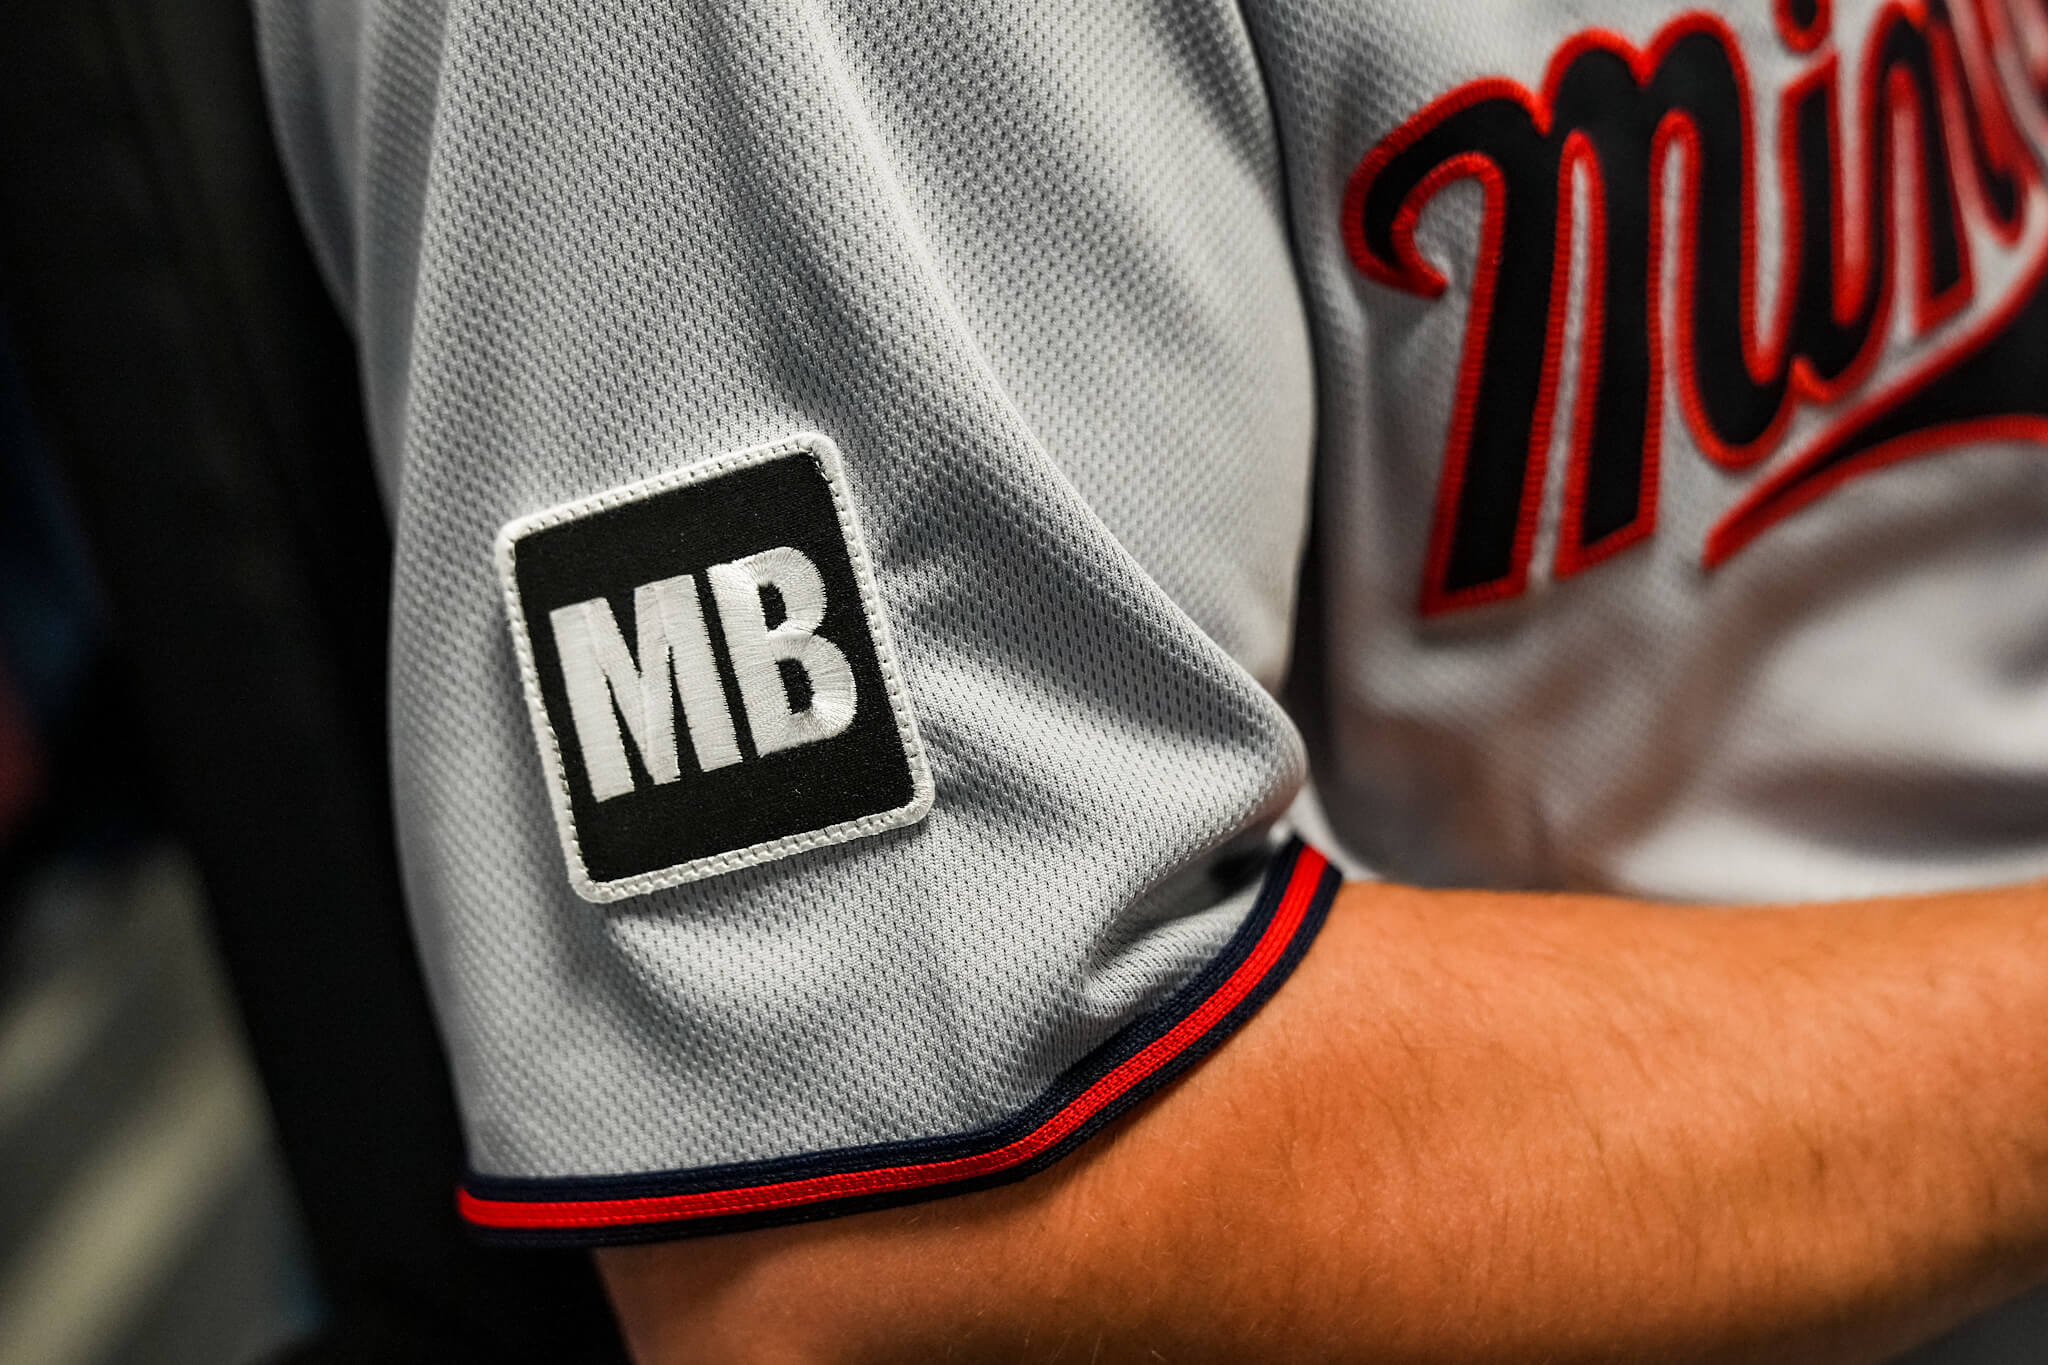 Bye, Camo: MLB changes its approach to Memorial Day uniforms